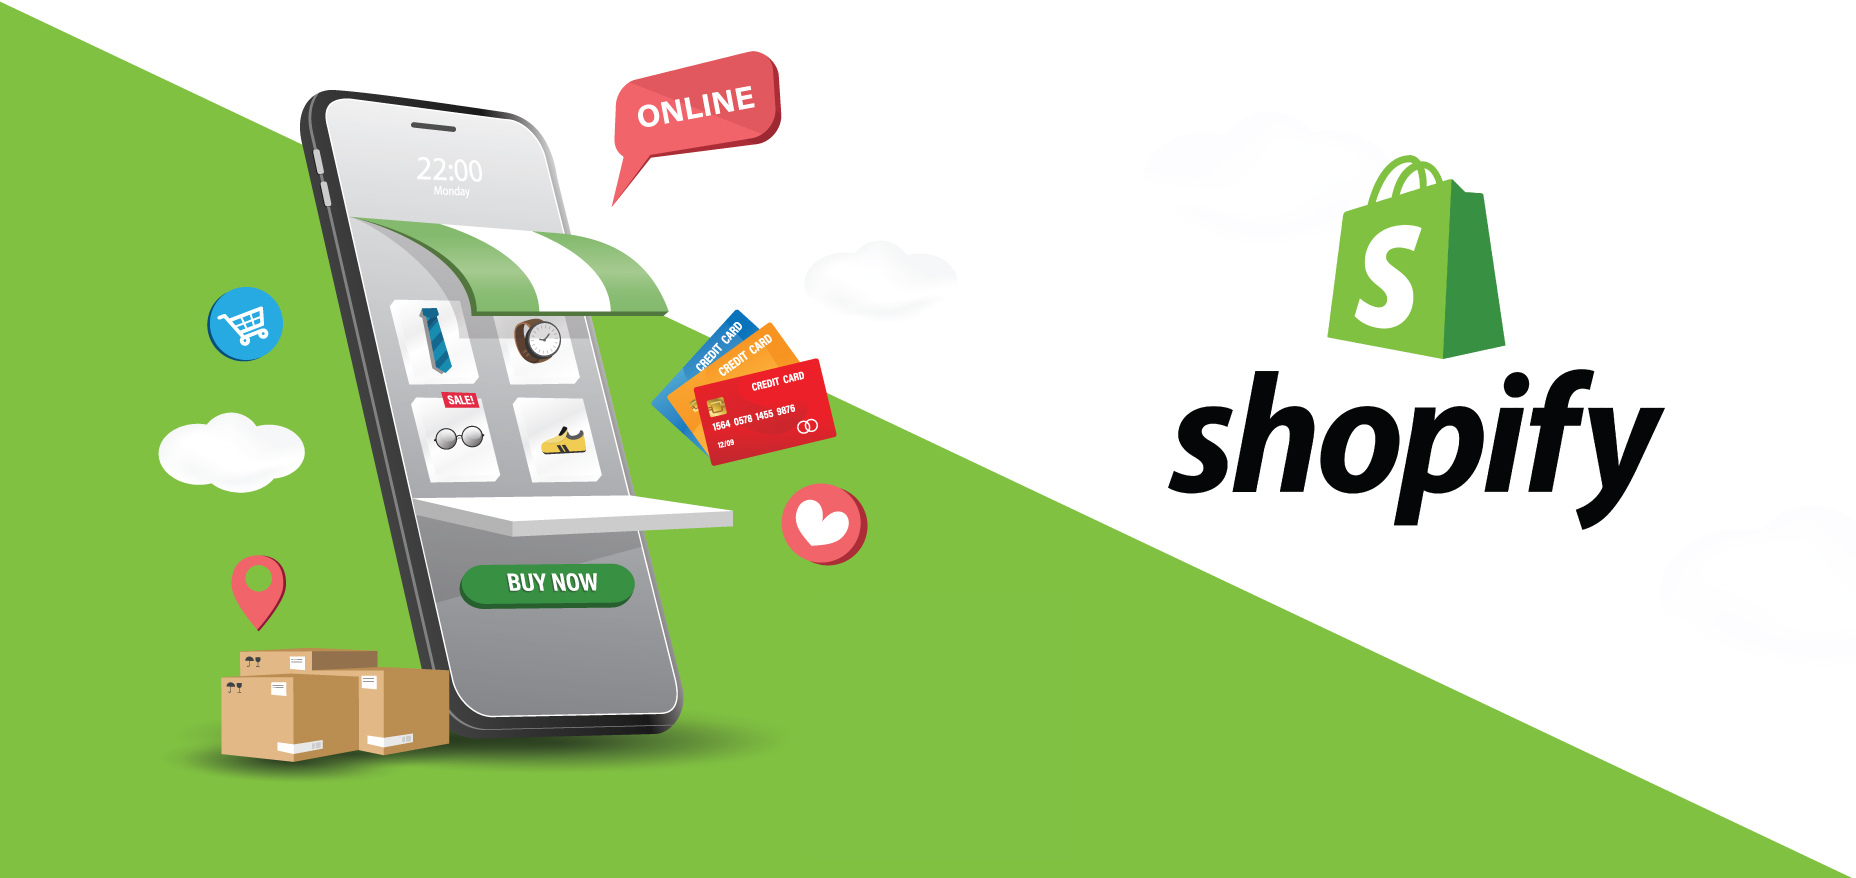 Shopify blog: The cost-effective way to promote your Shopify store organically